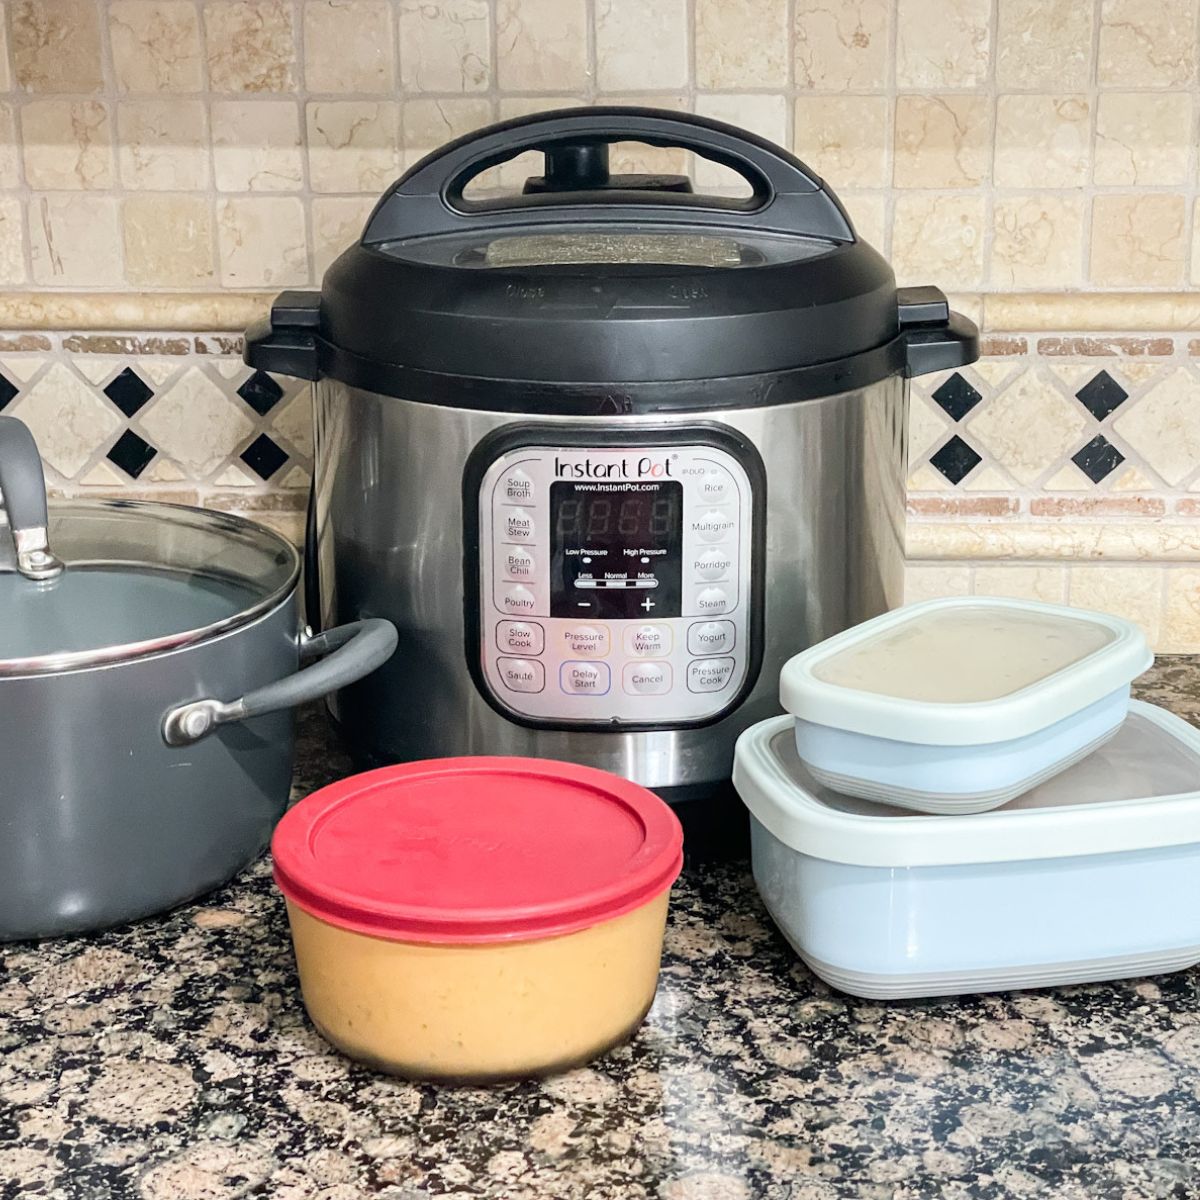 The pot, instant pot, and the containers with lid is on the counter tops with food at room temperature.